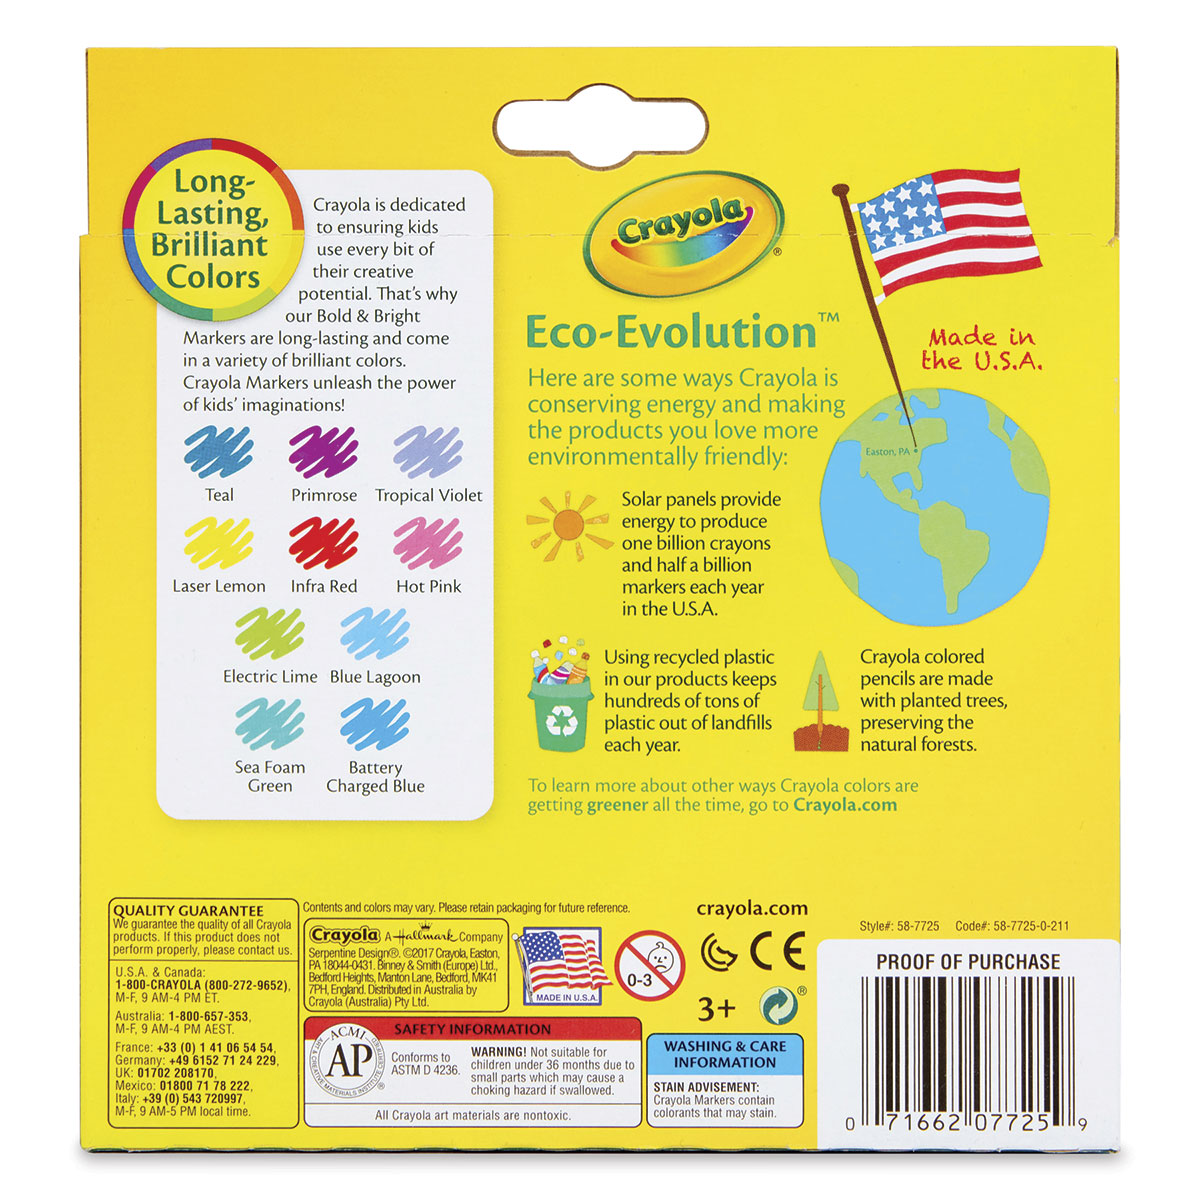 Crayola Fine Line Markers - Classic Colors, Set of 8